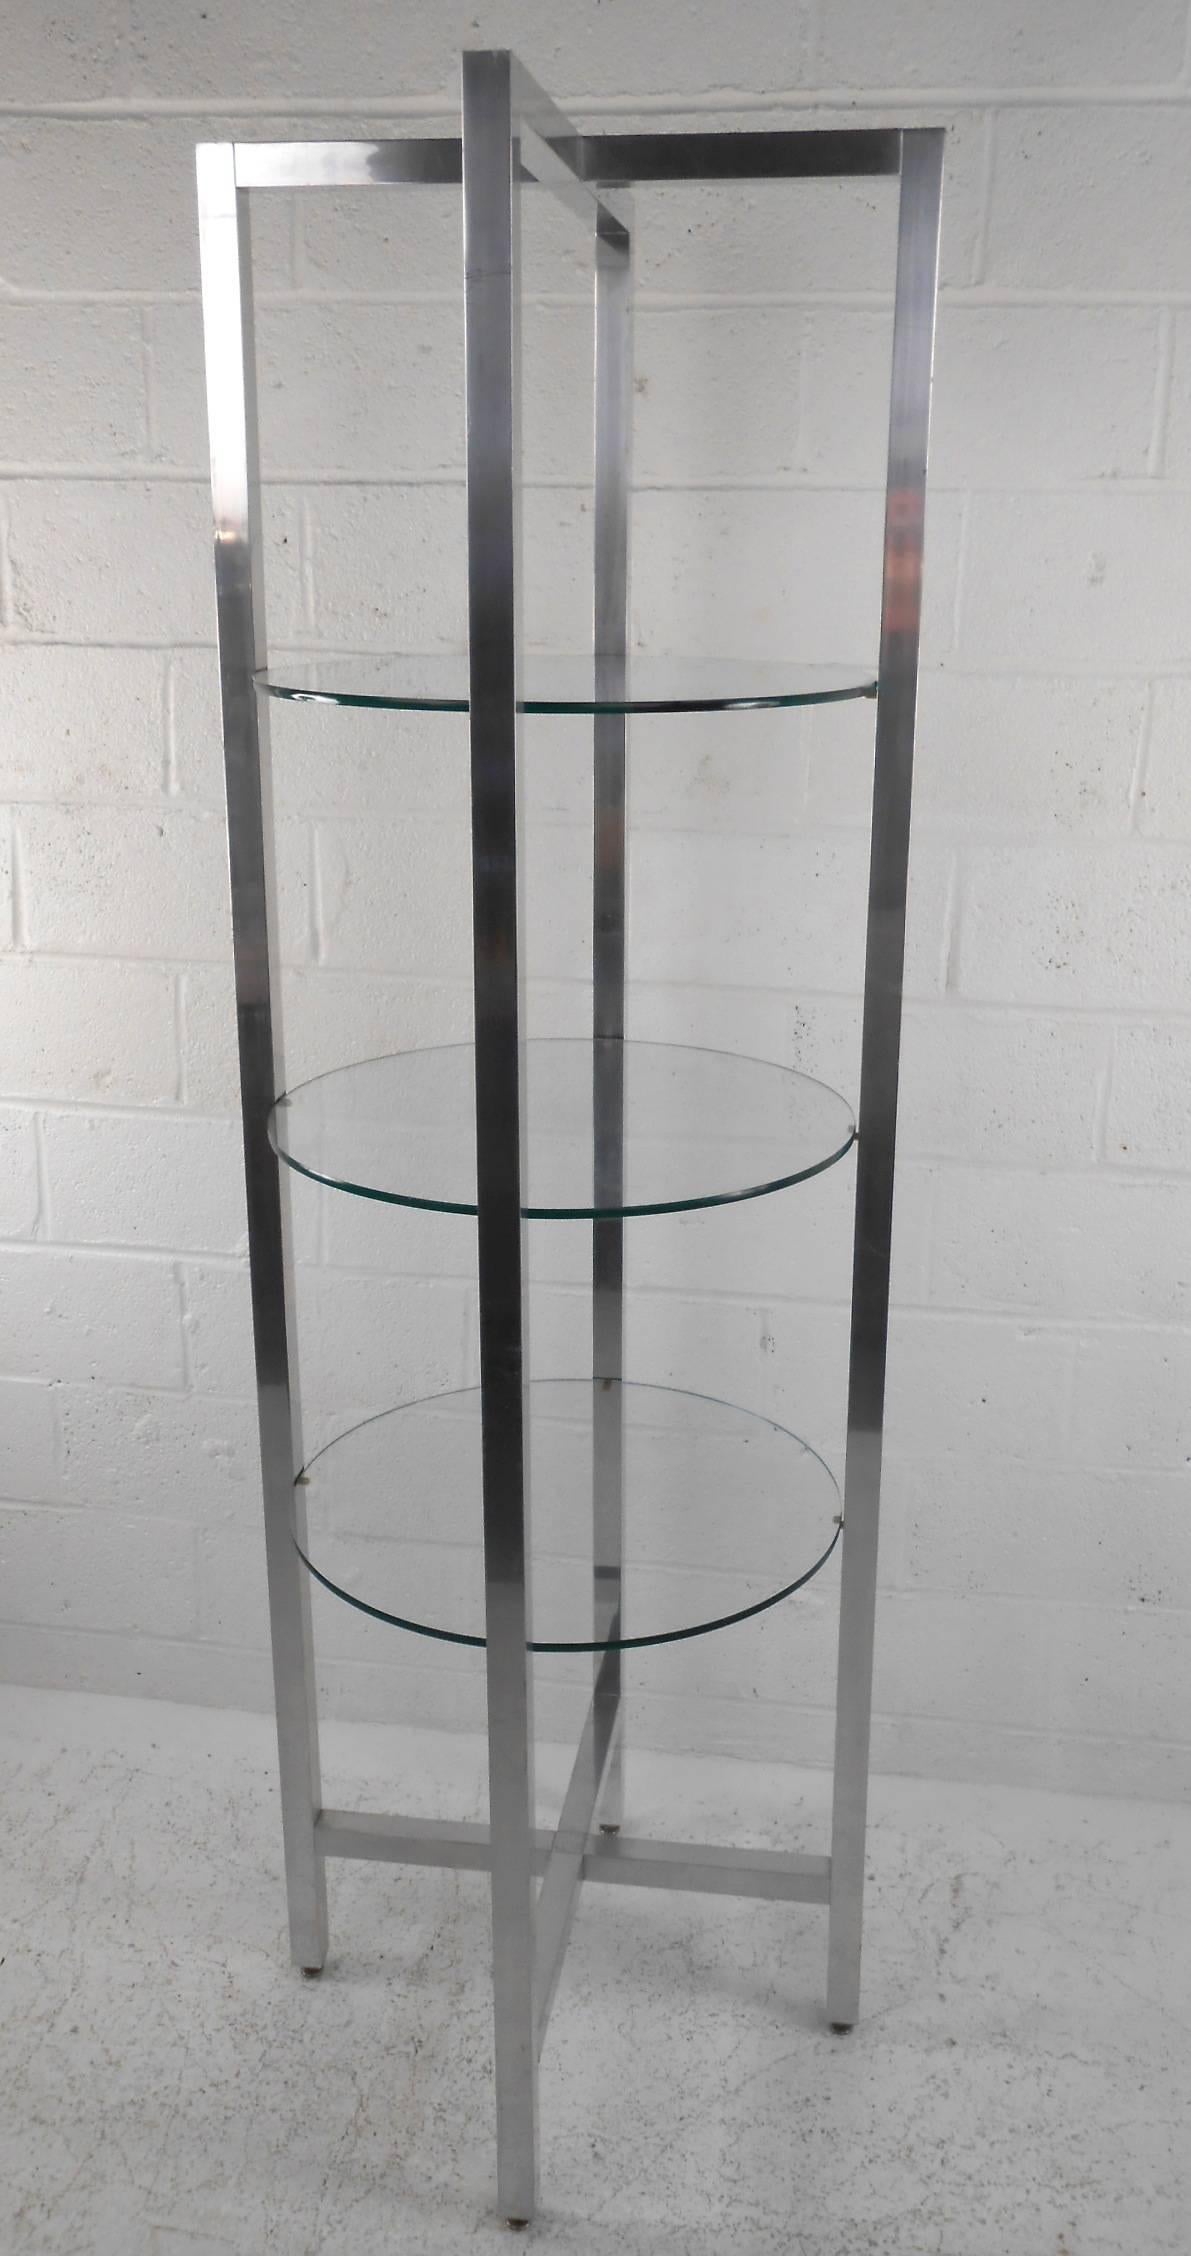 This beautiful vintage modern étagère features a heavy circular chrome frame with three round glass shelves. Stylish design with four supports running all the way from bottom to top forming an 